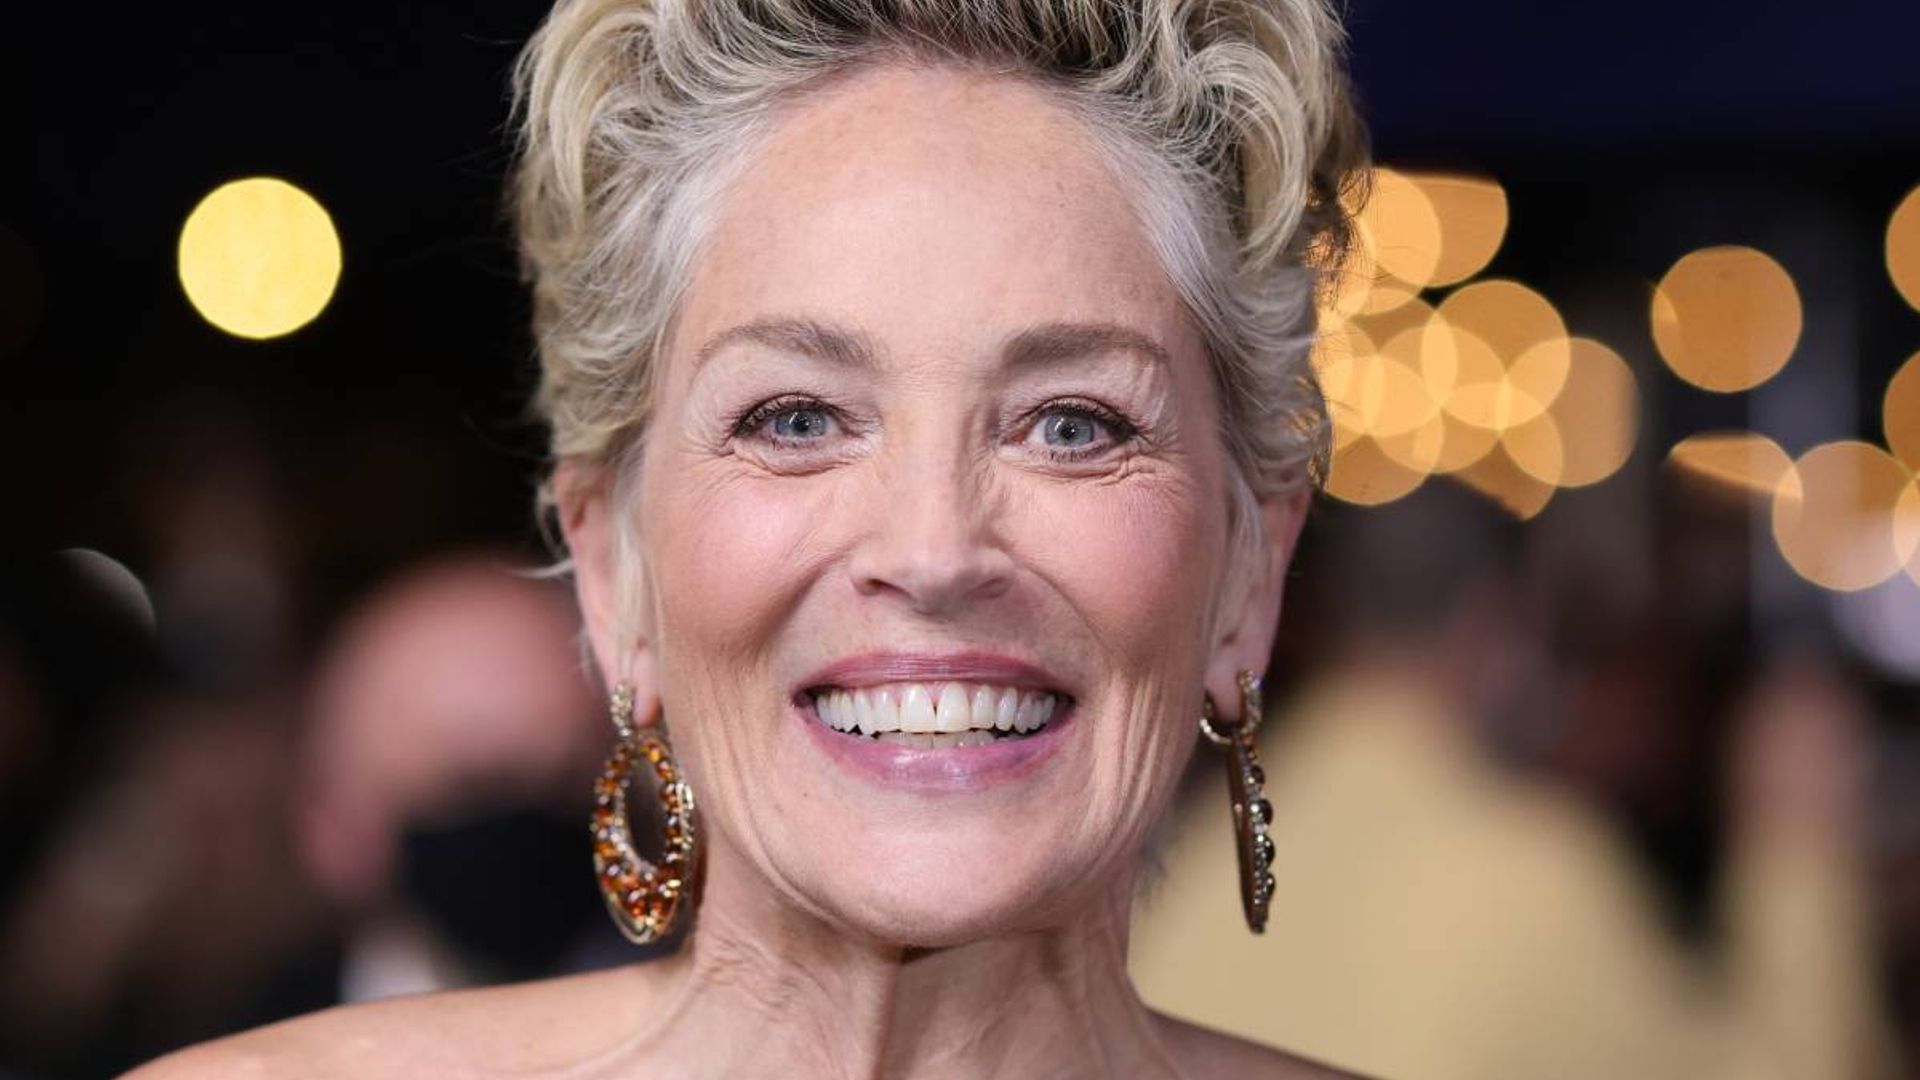 Sharon Stone showcases her natural beauty in flawless beach selfie